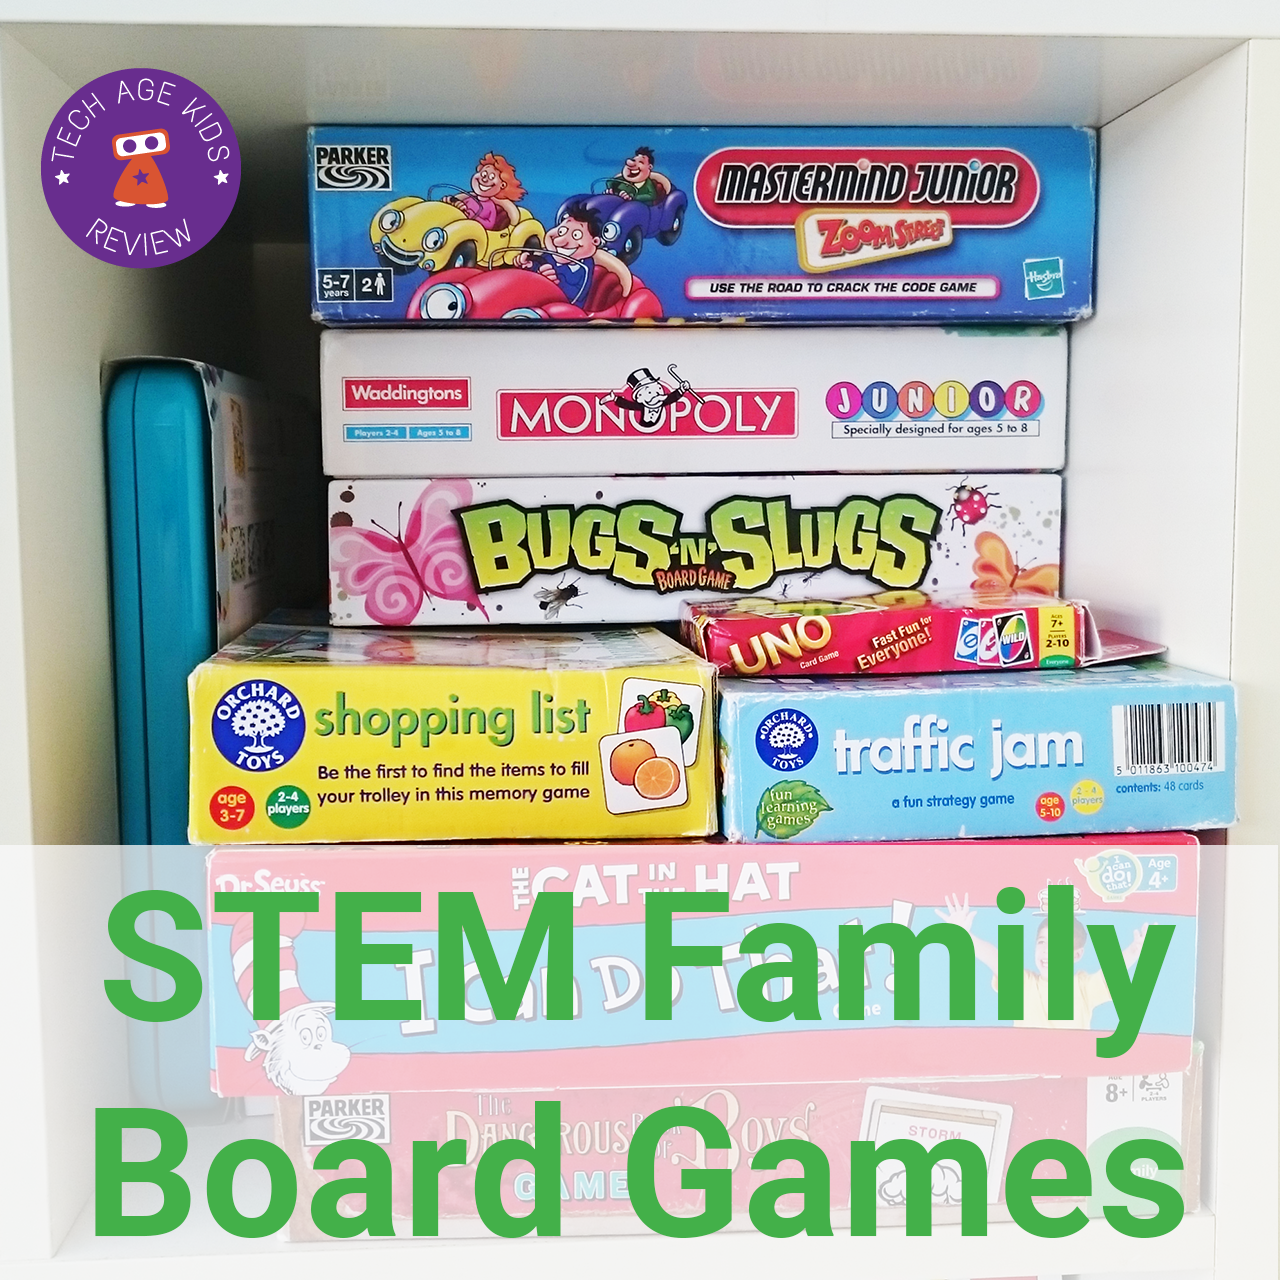 board games ages 3 and up